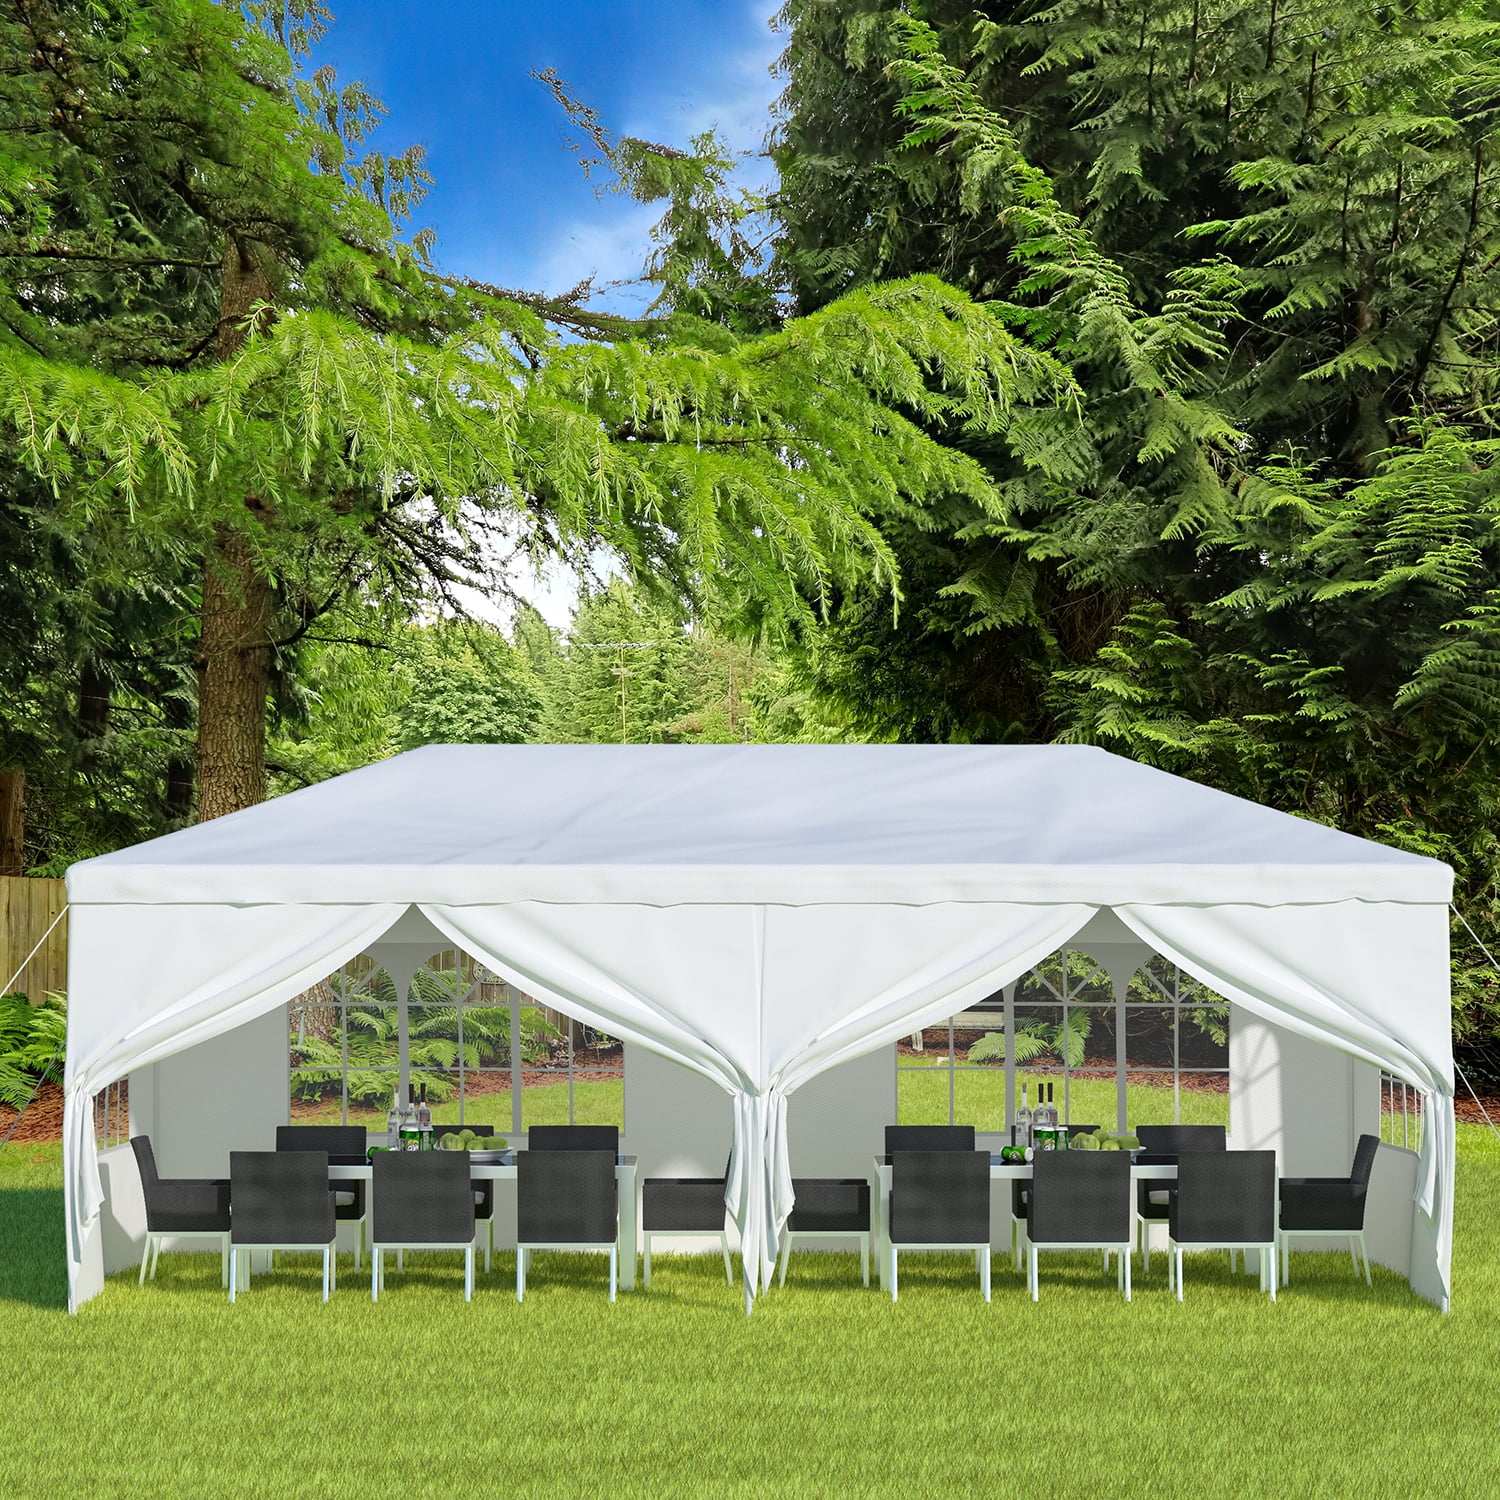 Large Waterproof Marquee Outdoor Gazebo Canopy Garden Party Tent Awning Patio 